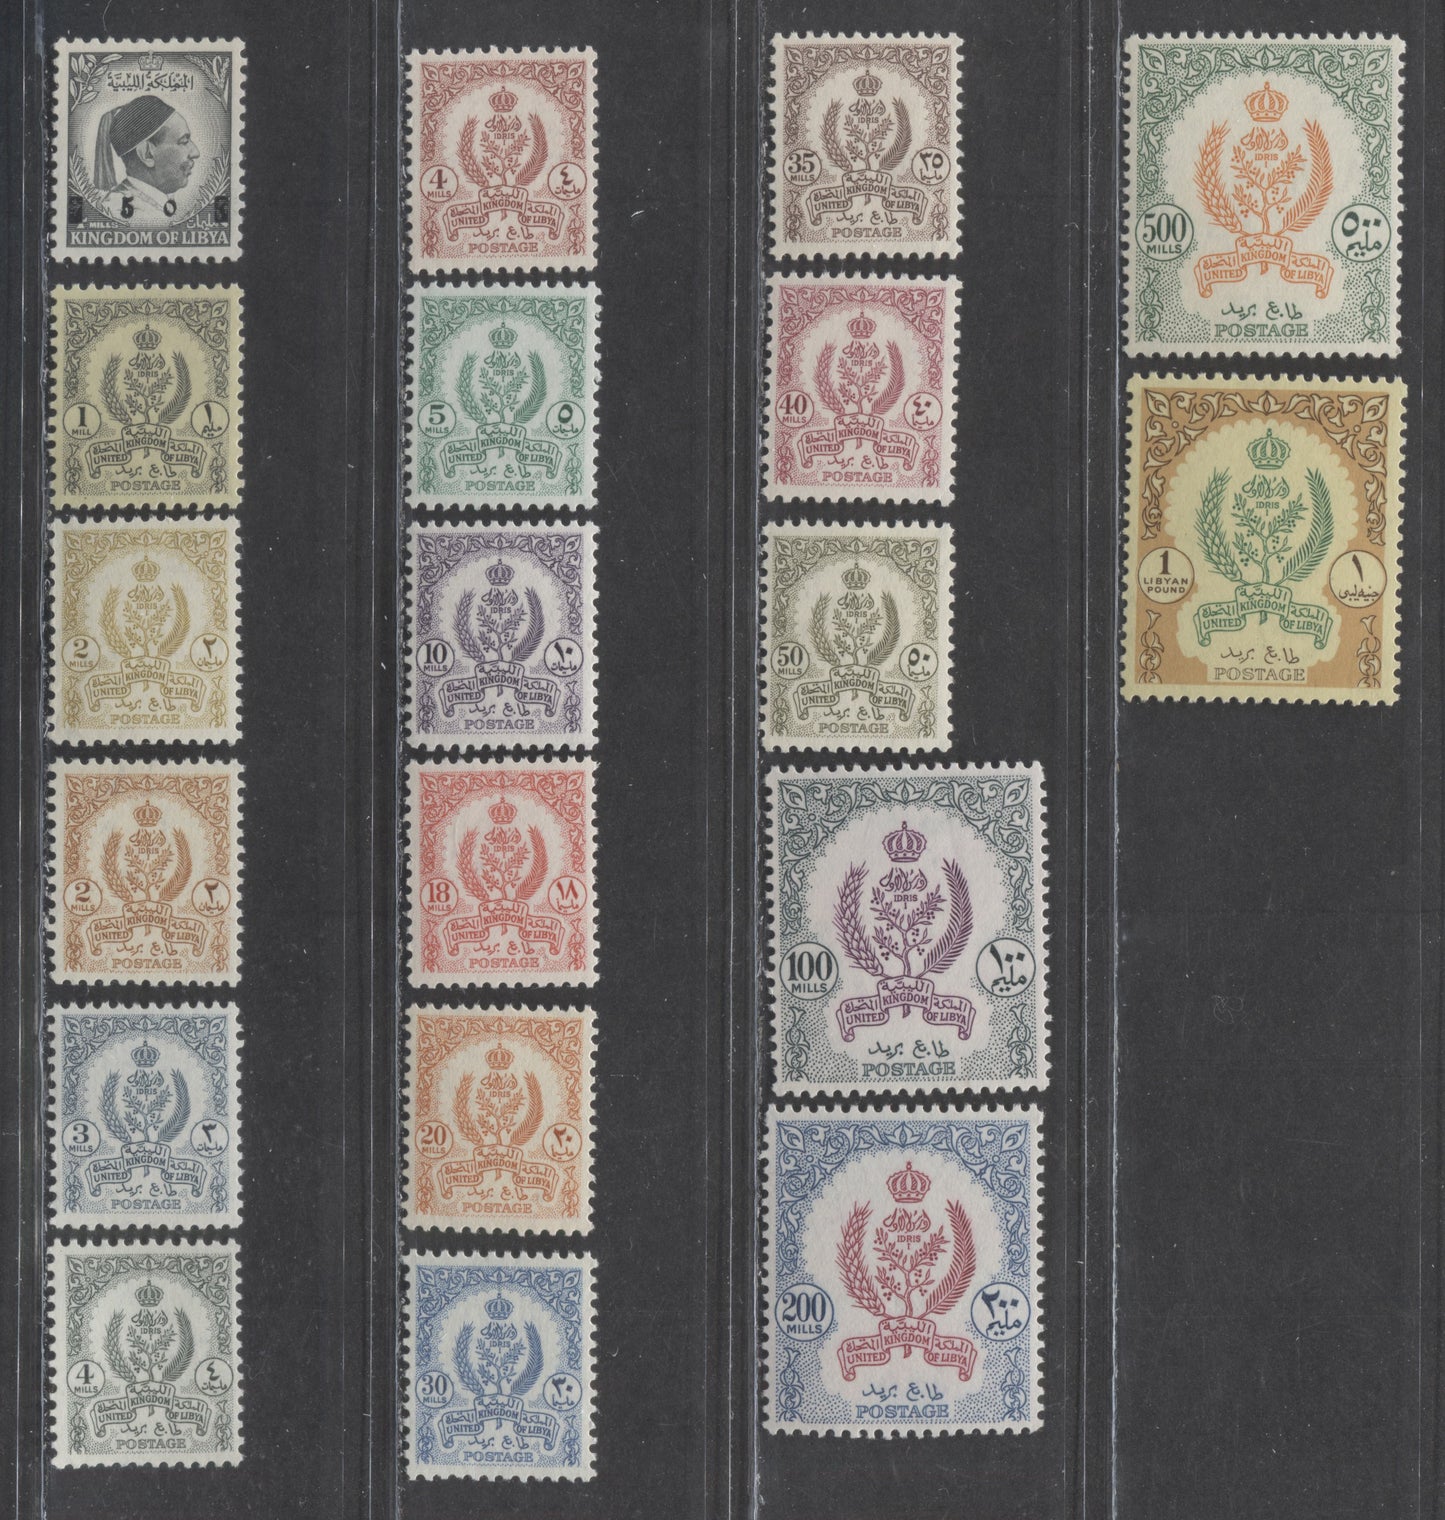 Lot 112 Libya SC#153/179 1955 Arms Definitives, A VFNH Range Of Singles, 2017 Scott Cat. $34.6 USD, Click on Listing to See ALL Pictures